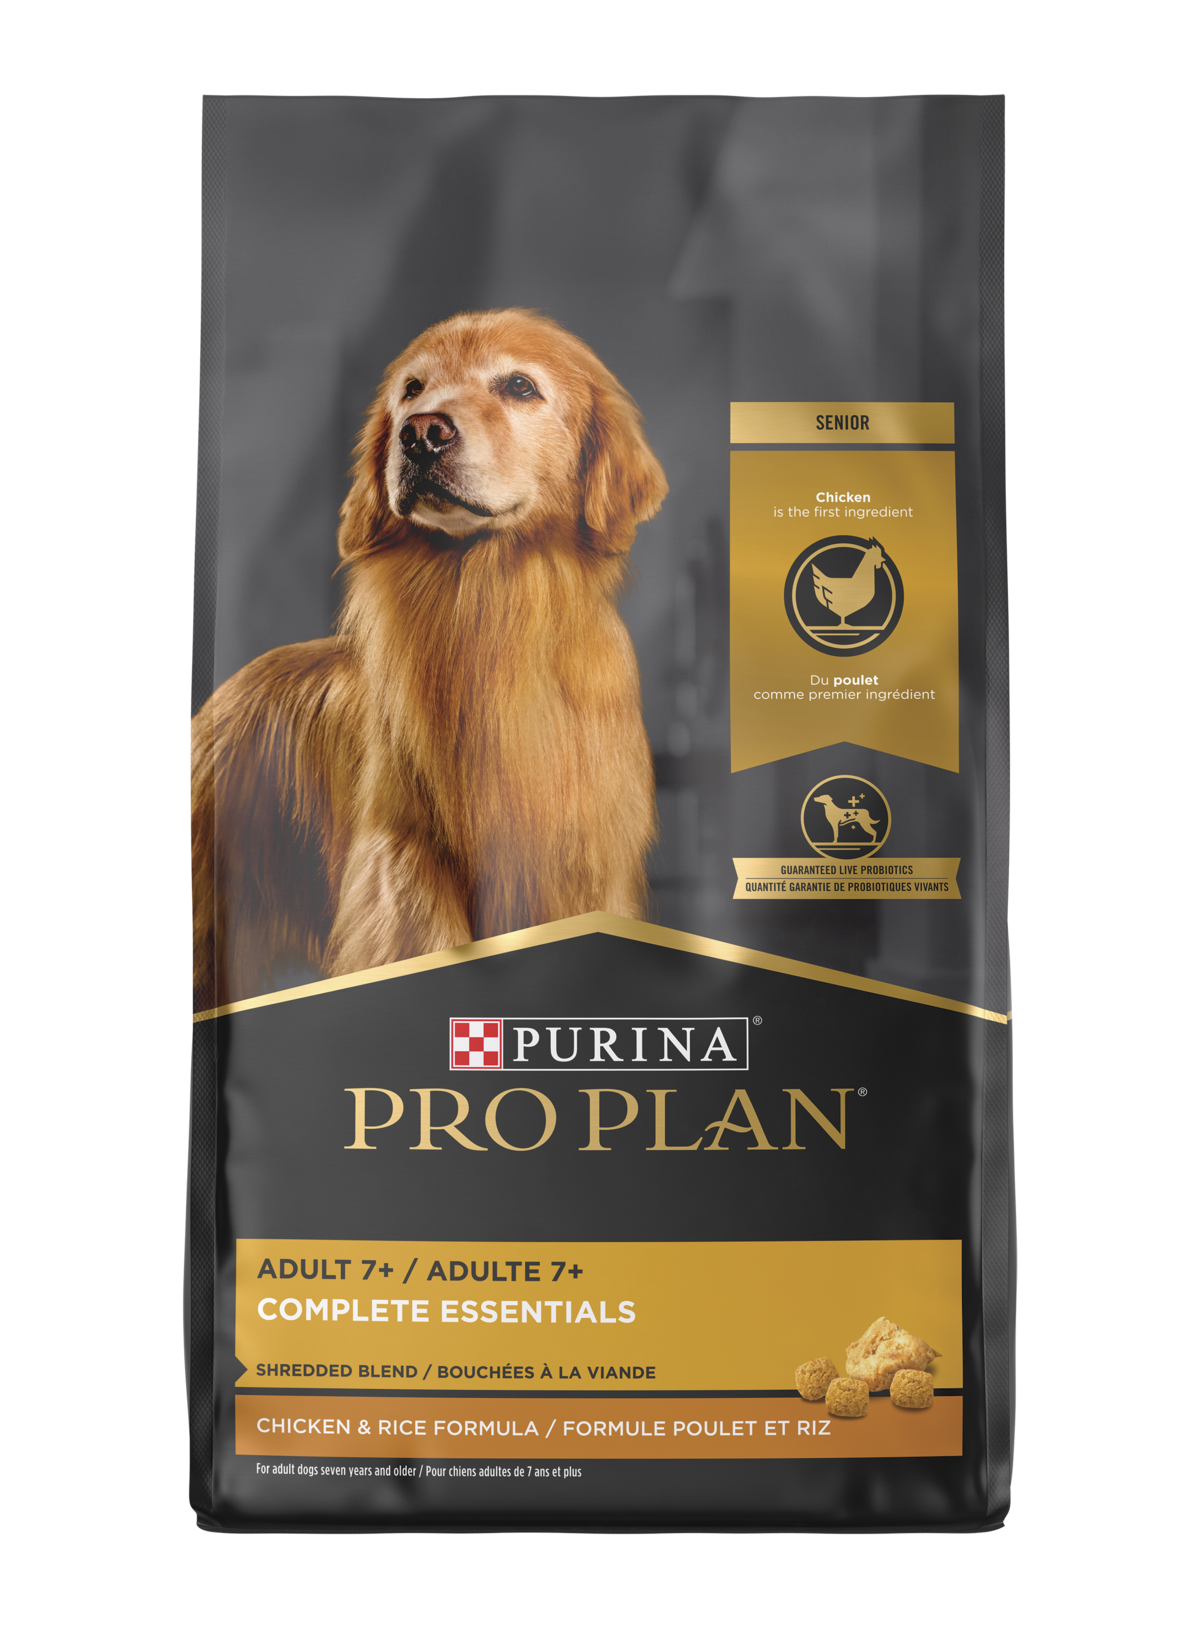 Purina Pro Plan Adult 7+ Complete Essentials Shredded Blend Chicken & Rice, 6 lbs